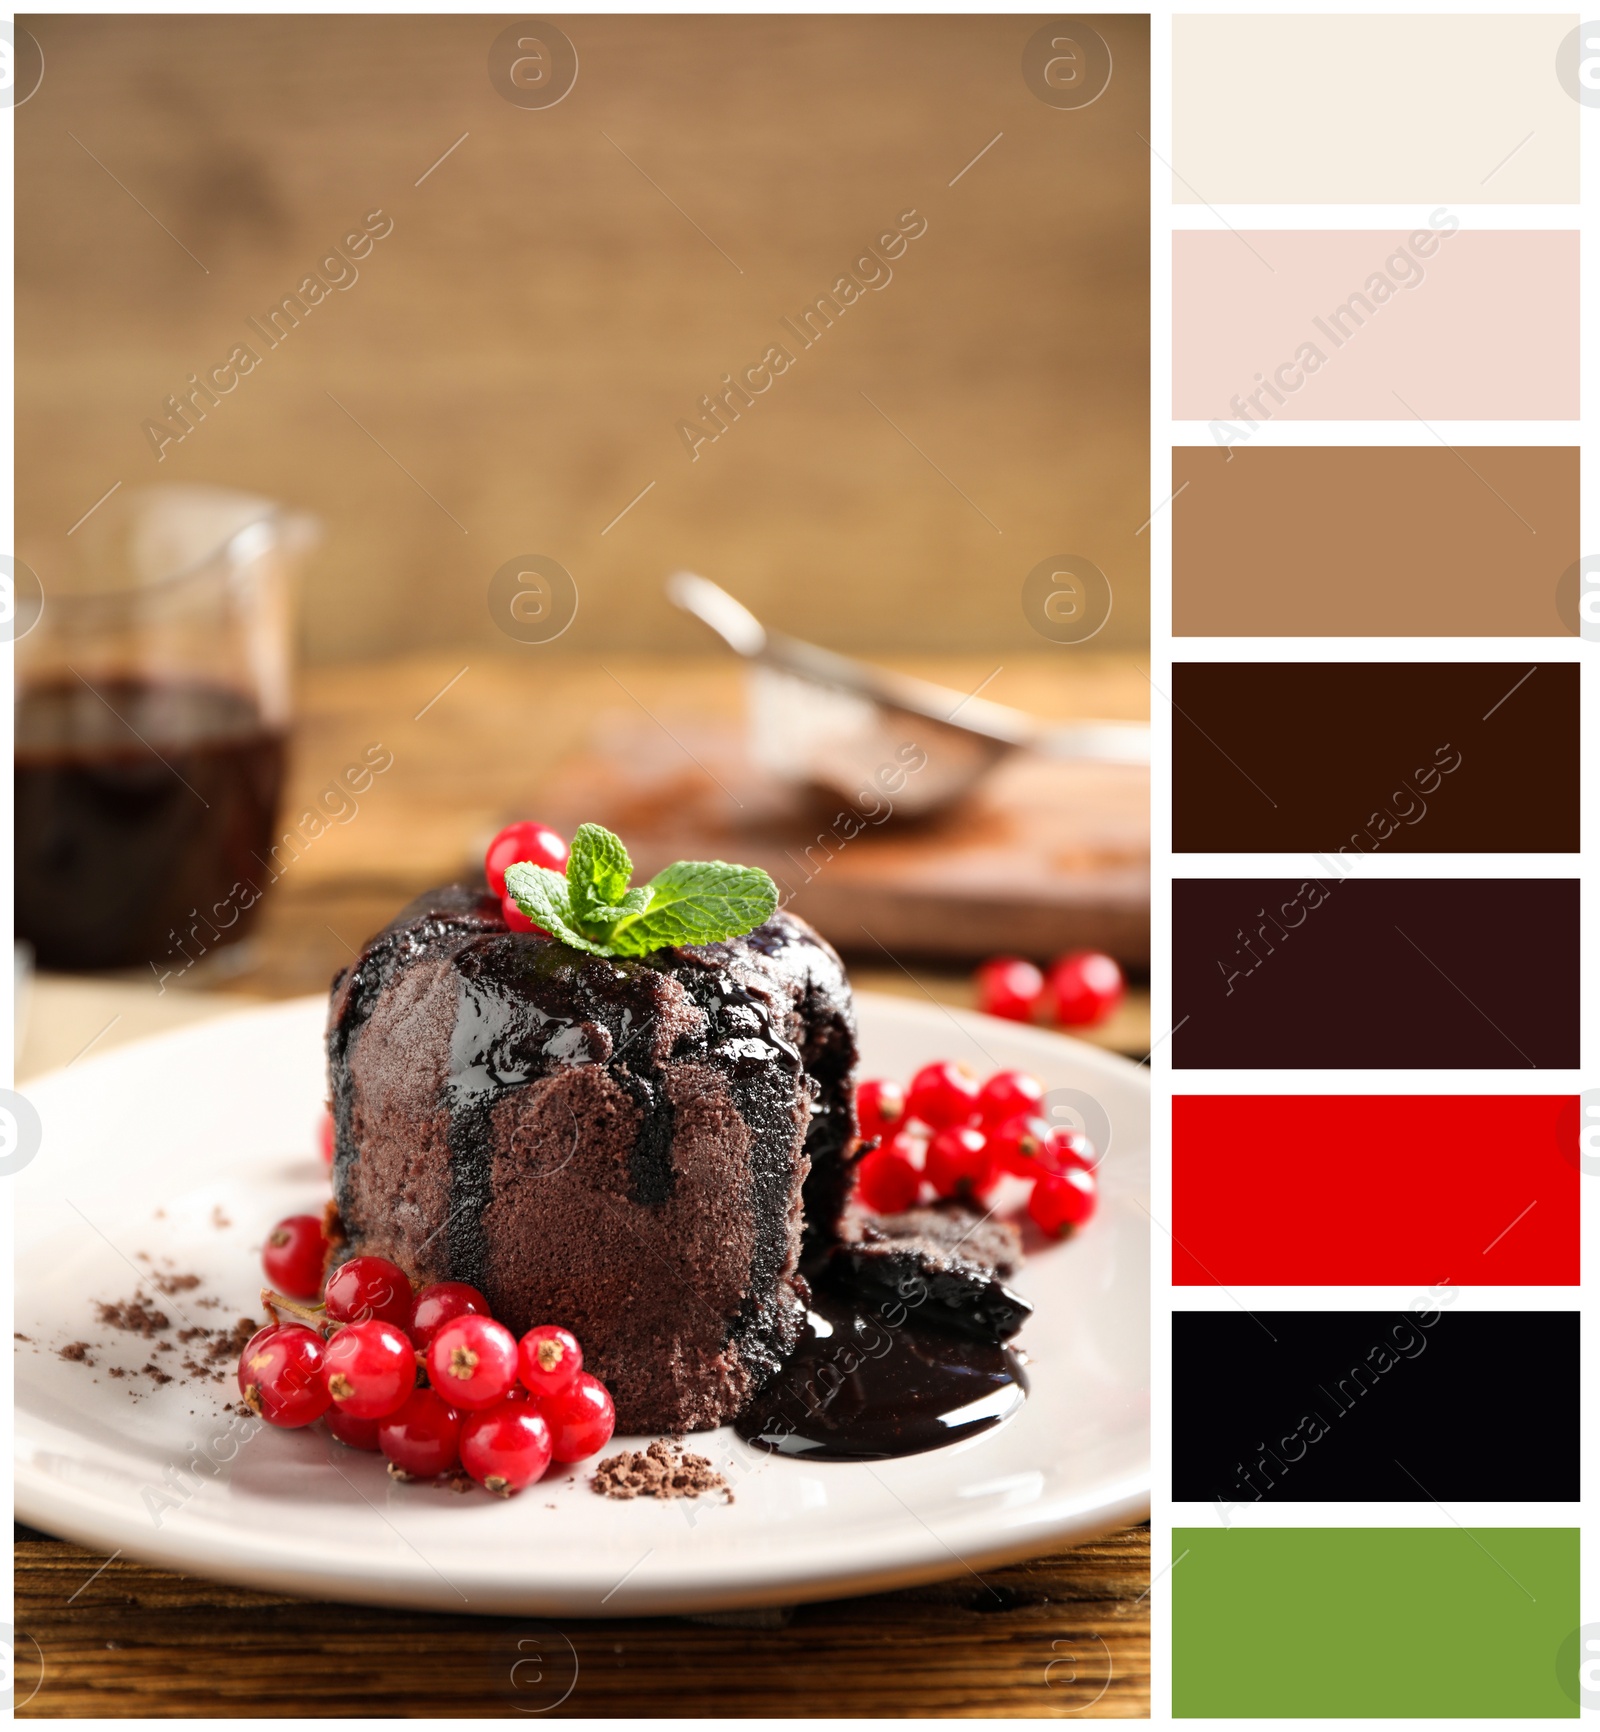 Image of Delicious warm chocolate lava cake with mint and berries on wooden table and color palette. Collage